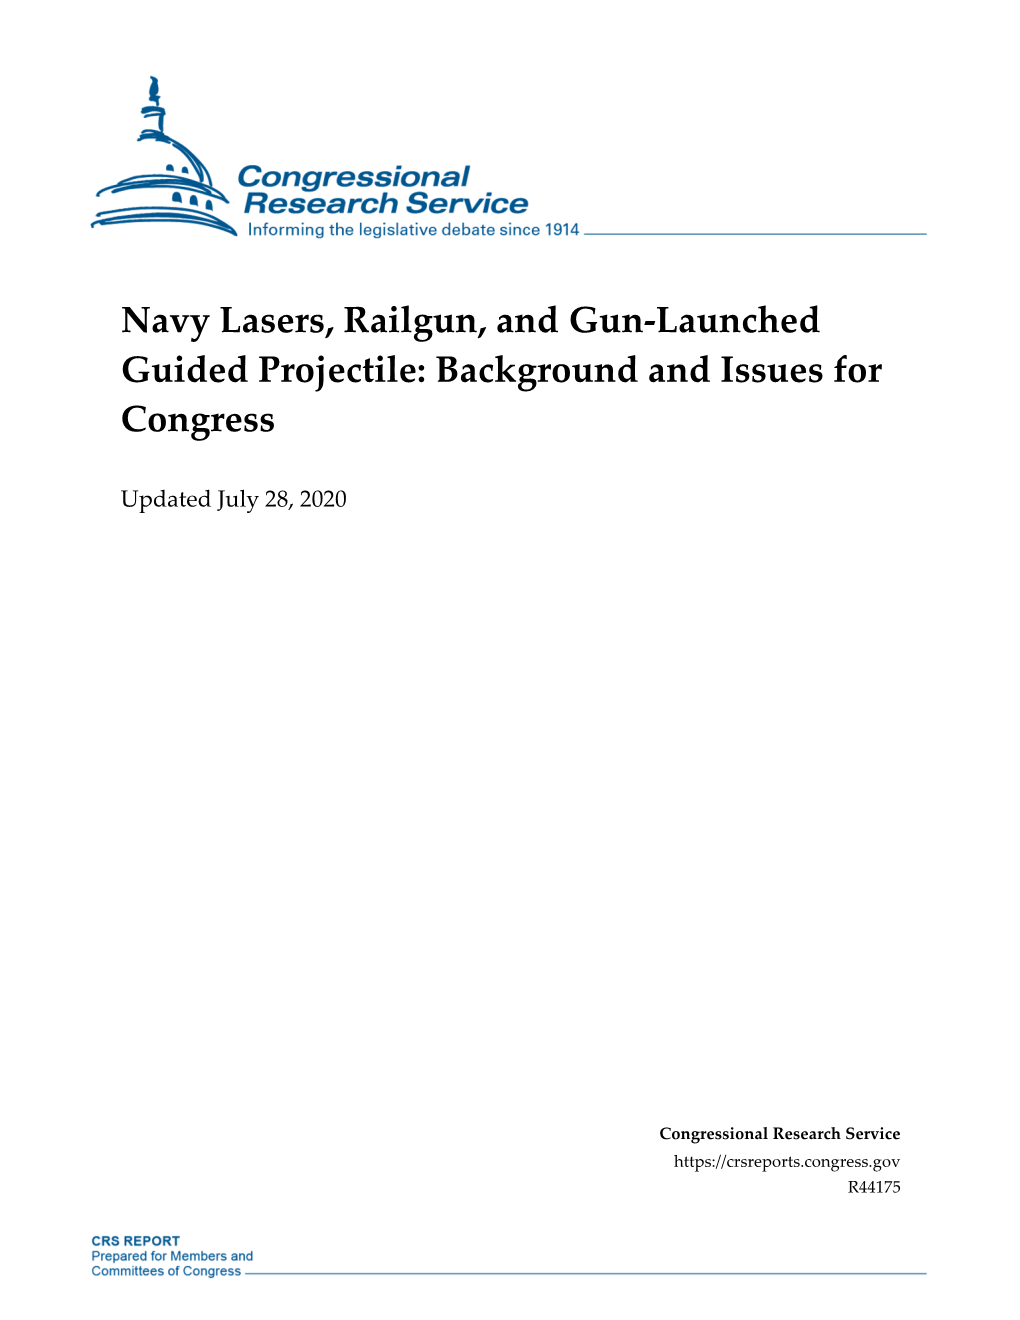 Navy Lasers, Railgun, and Gun-Launched Guided Projectile: Background and Issues for Congress